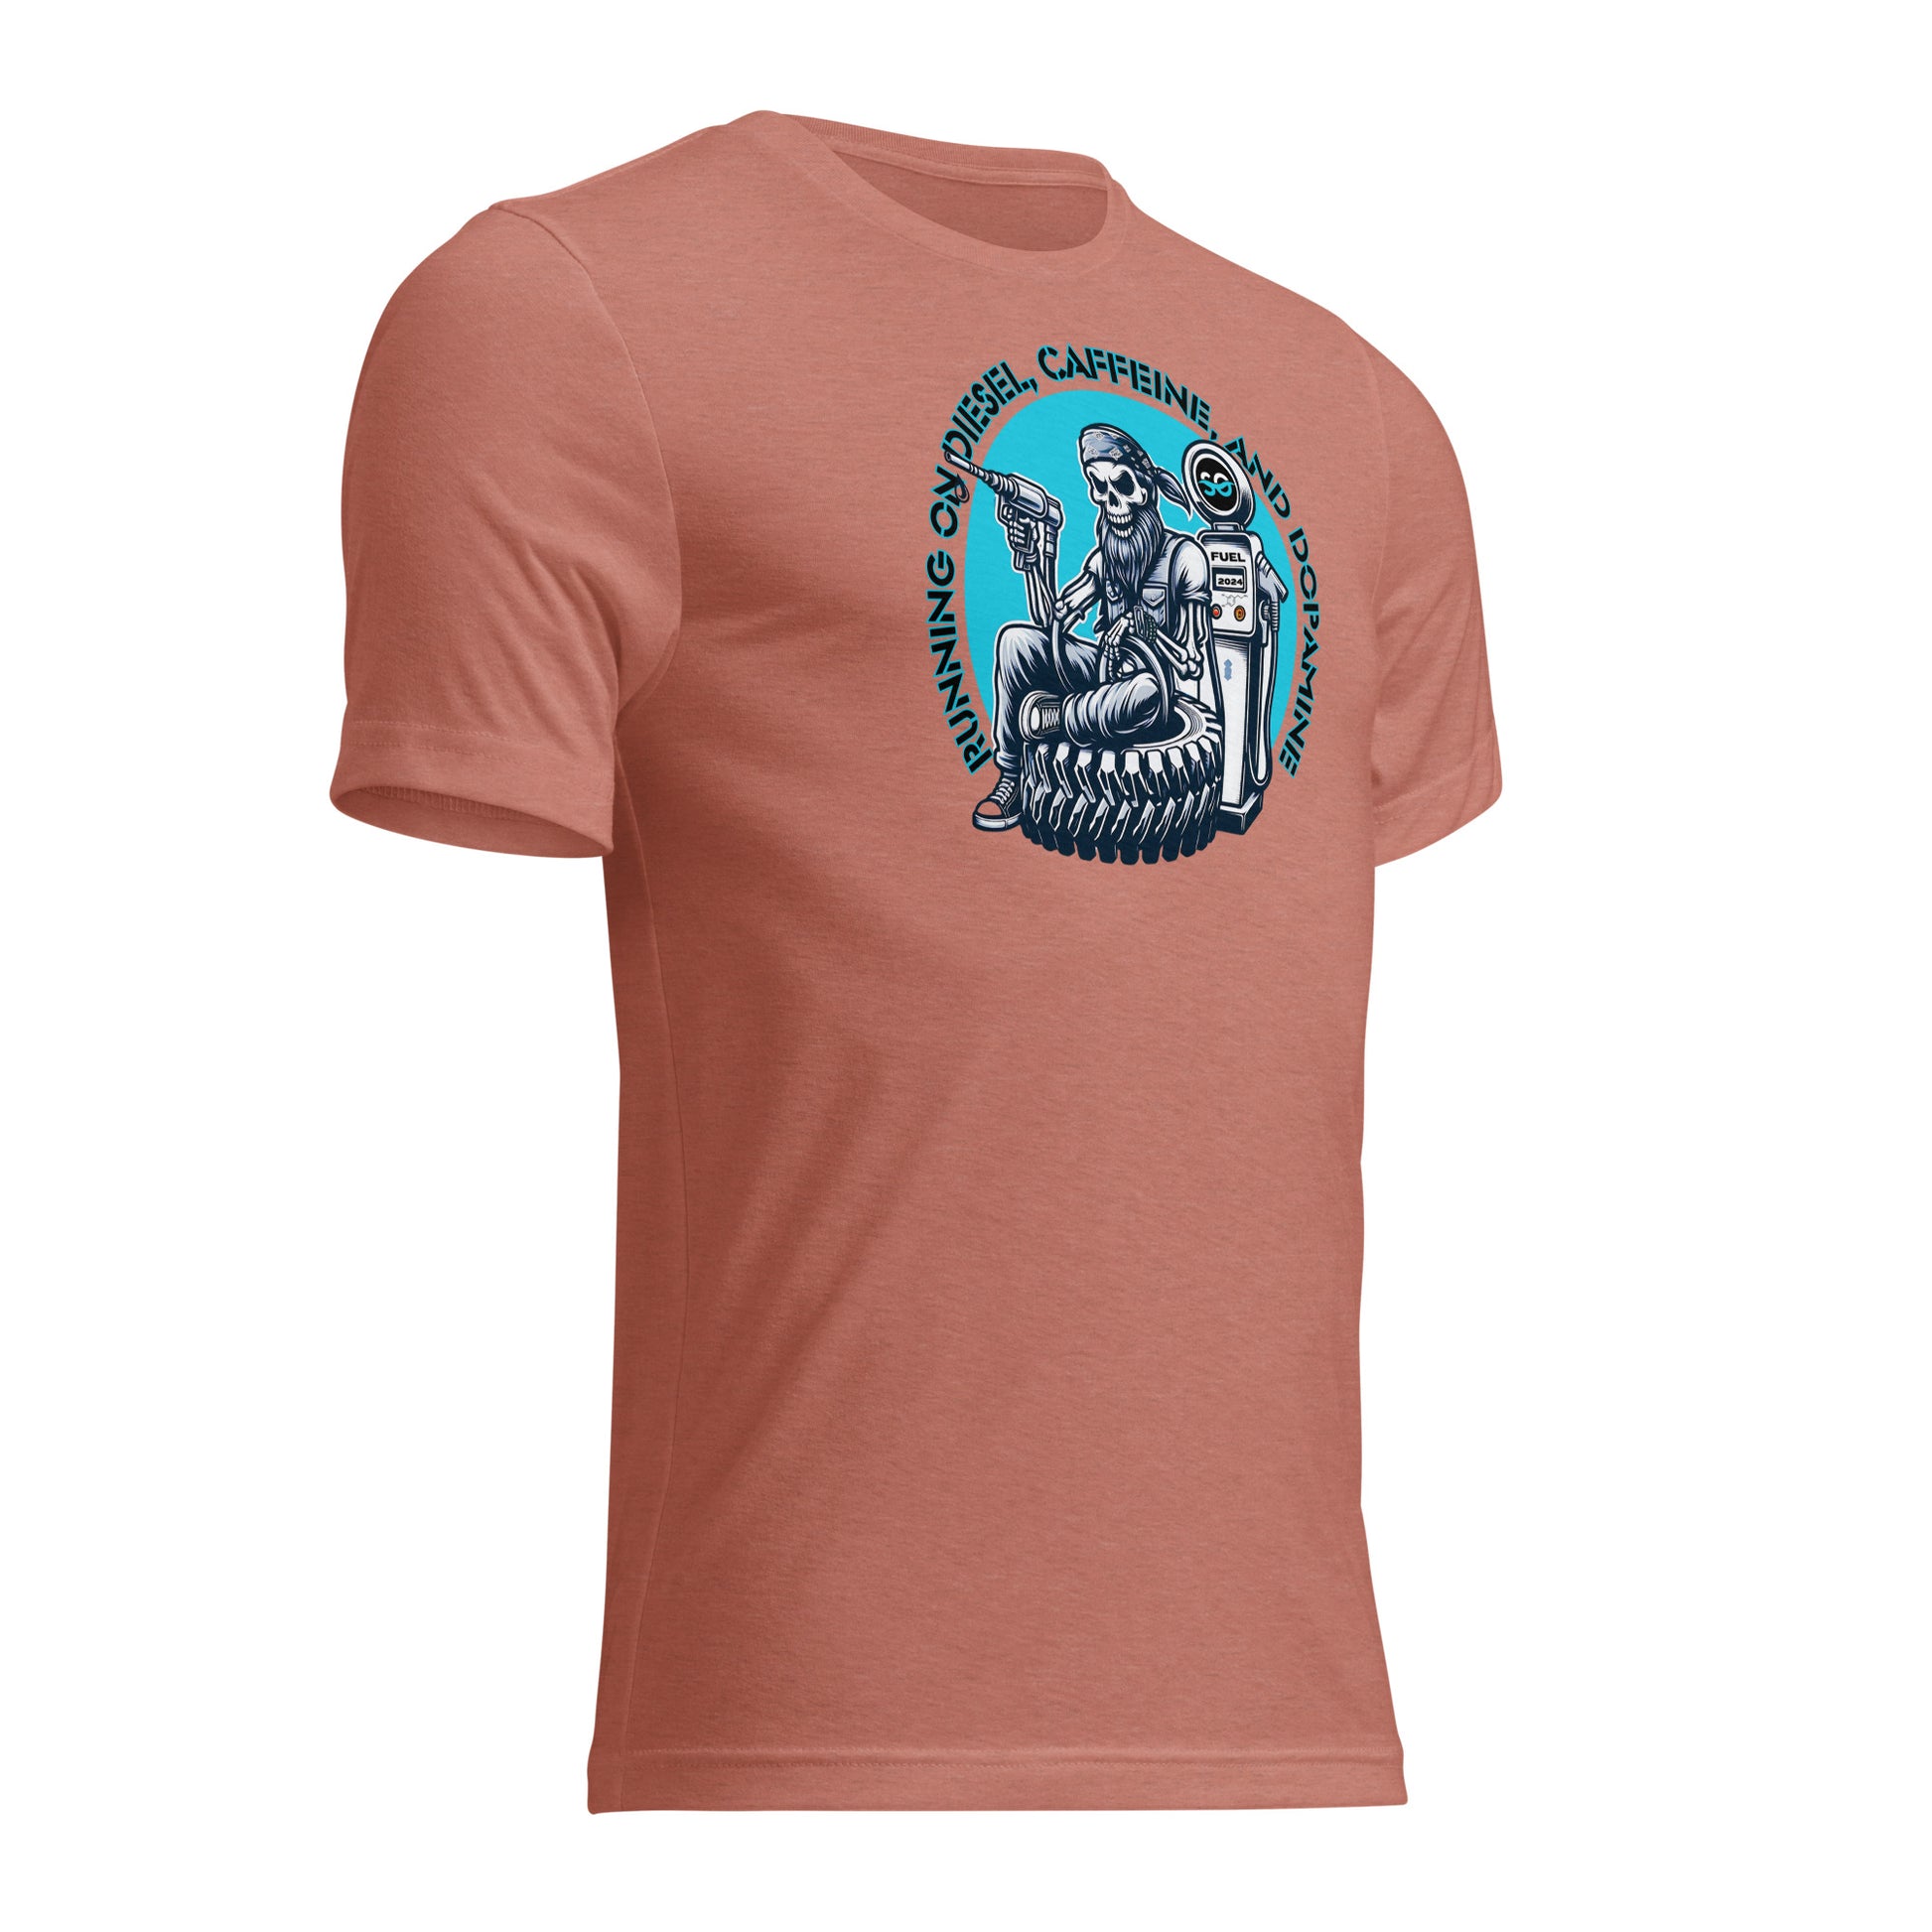 a t - shirt with an image of a man on a motorcycle